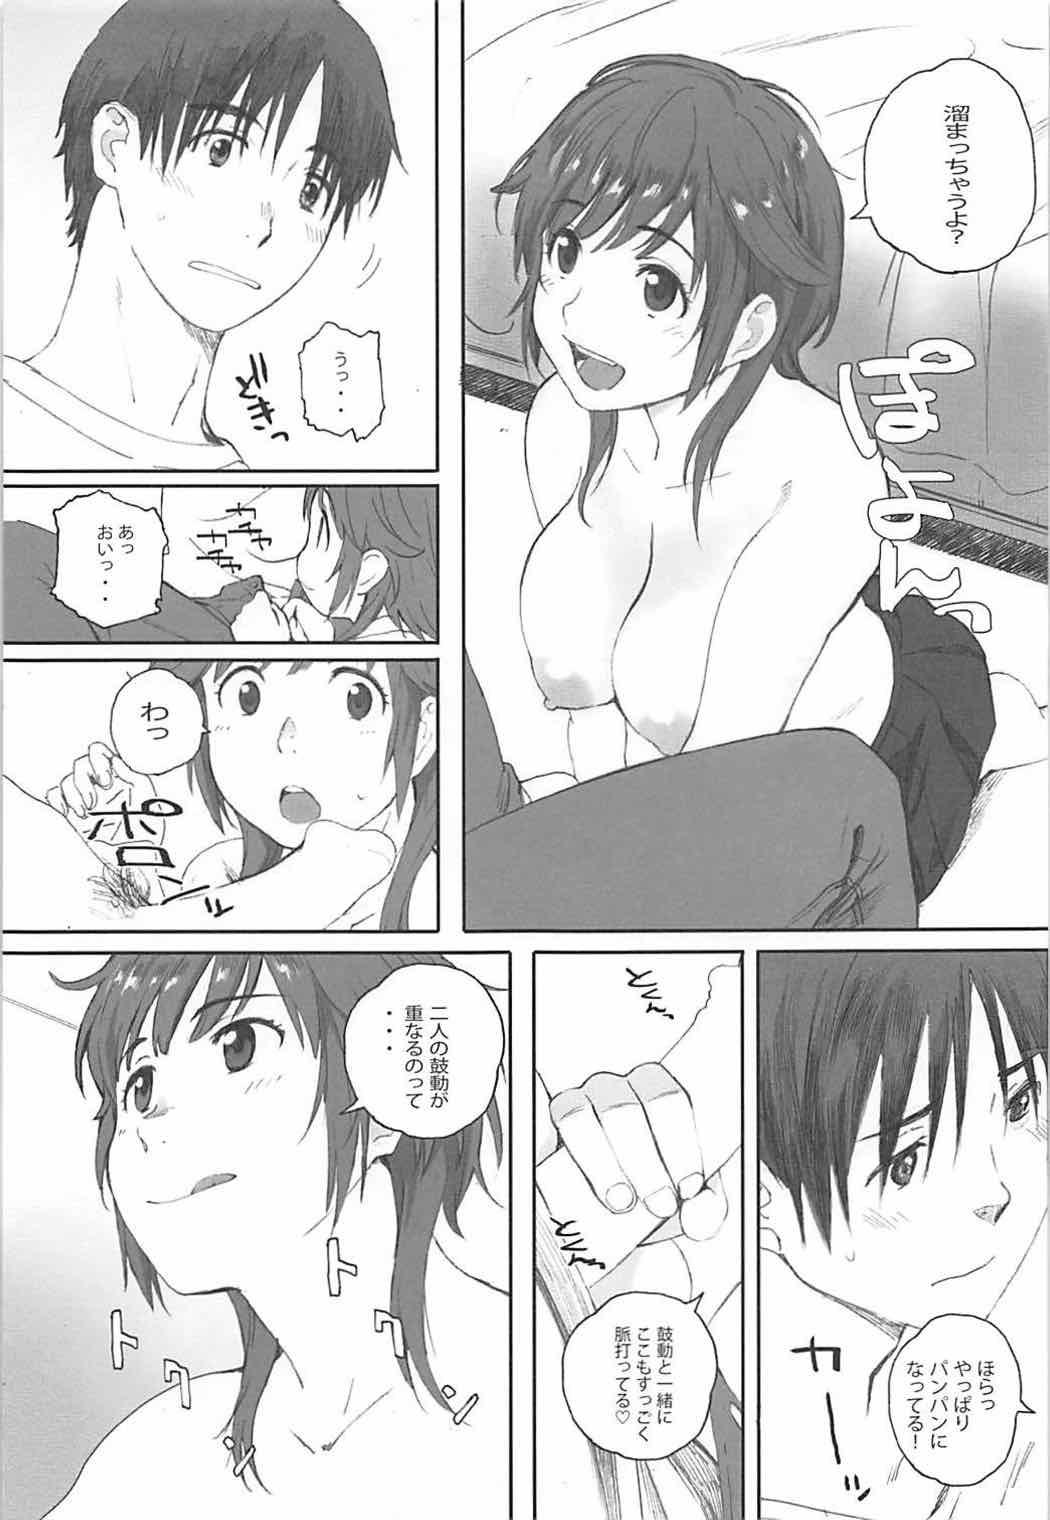 Best Blowjob Happy Life 5 - Amagami Skirt - Page 10